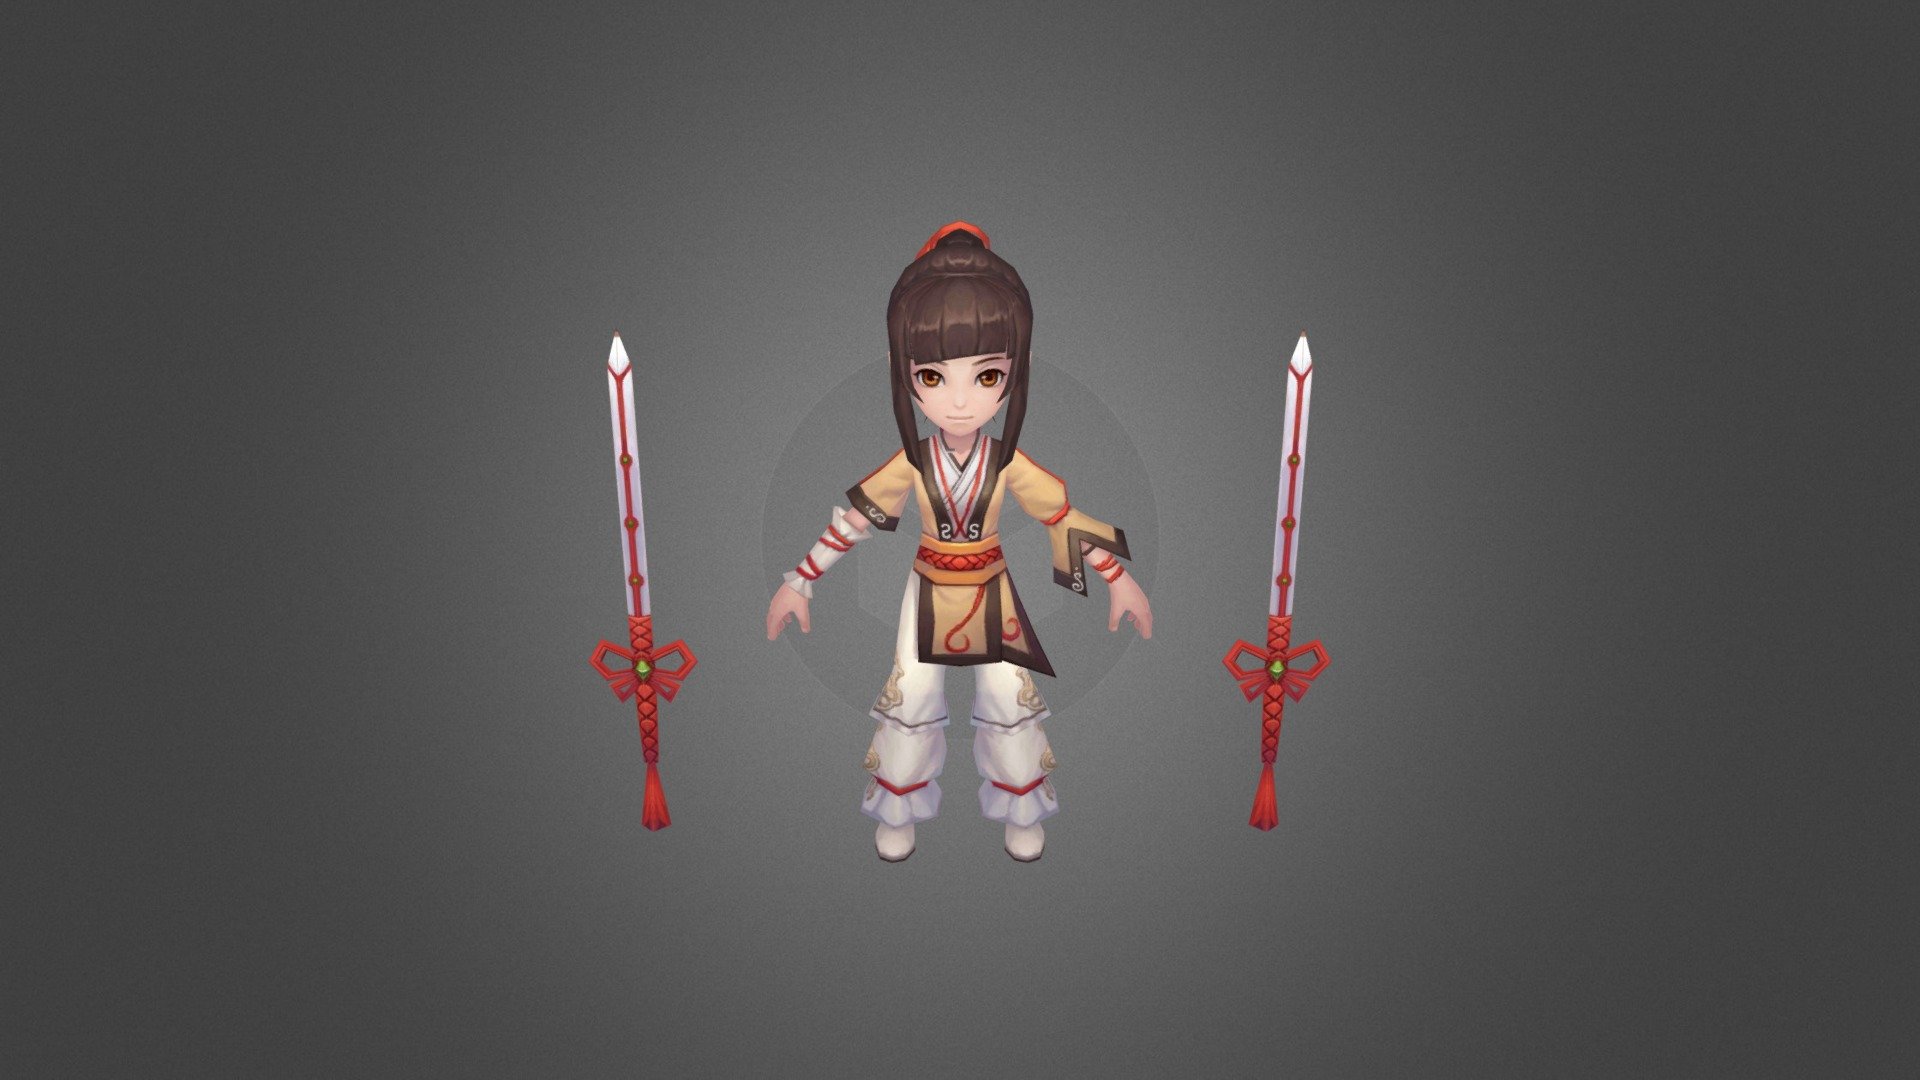 Chibi Girl 3D Model. You can use this model in video games, cartoons, anime, and other CG arts.

This model is available for purchase from our website:
https://cg-moon.com/product/character-1622/

Hope you like this model :)

For the list of full chibi characters pack, please take a look at https://cg-moon.com/product-tag/chibi/ - Chibi Girl 3D Model - 3D model by CG-Moon 3d model